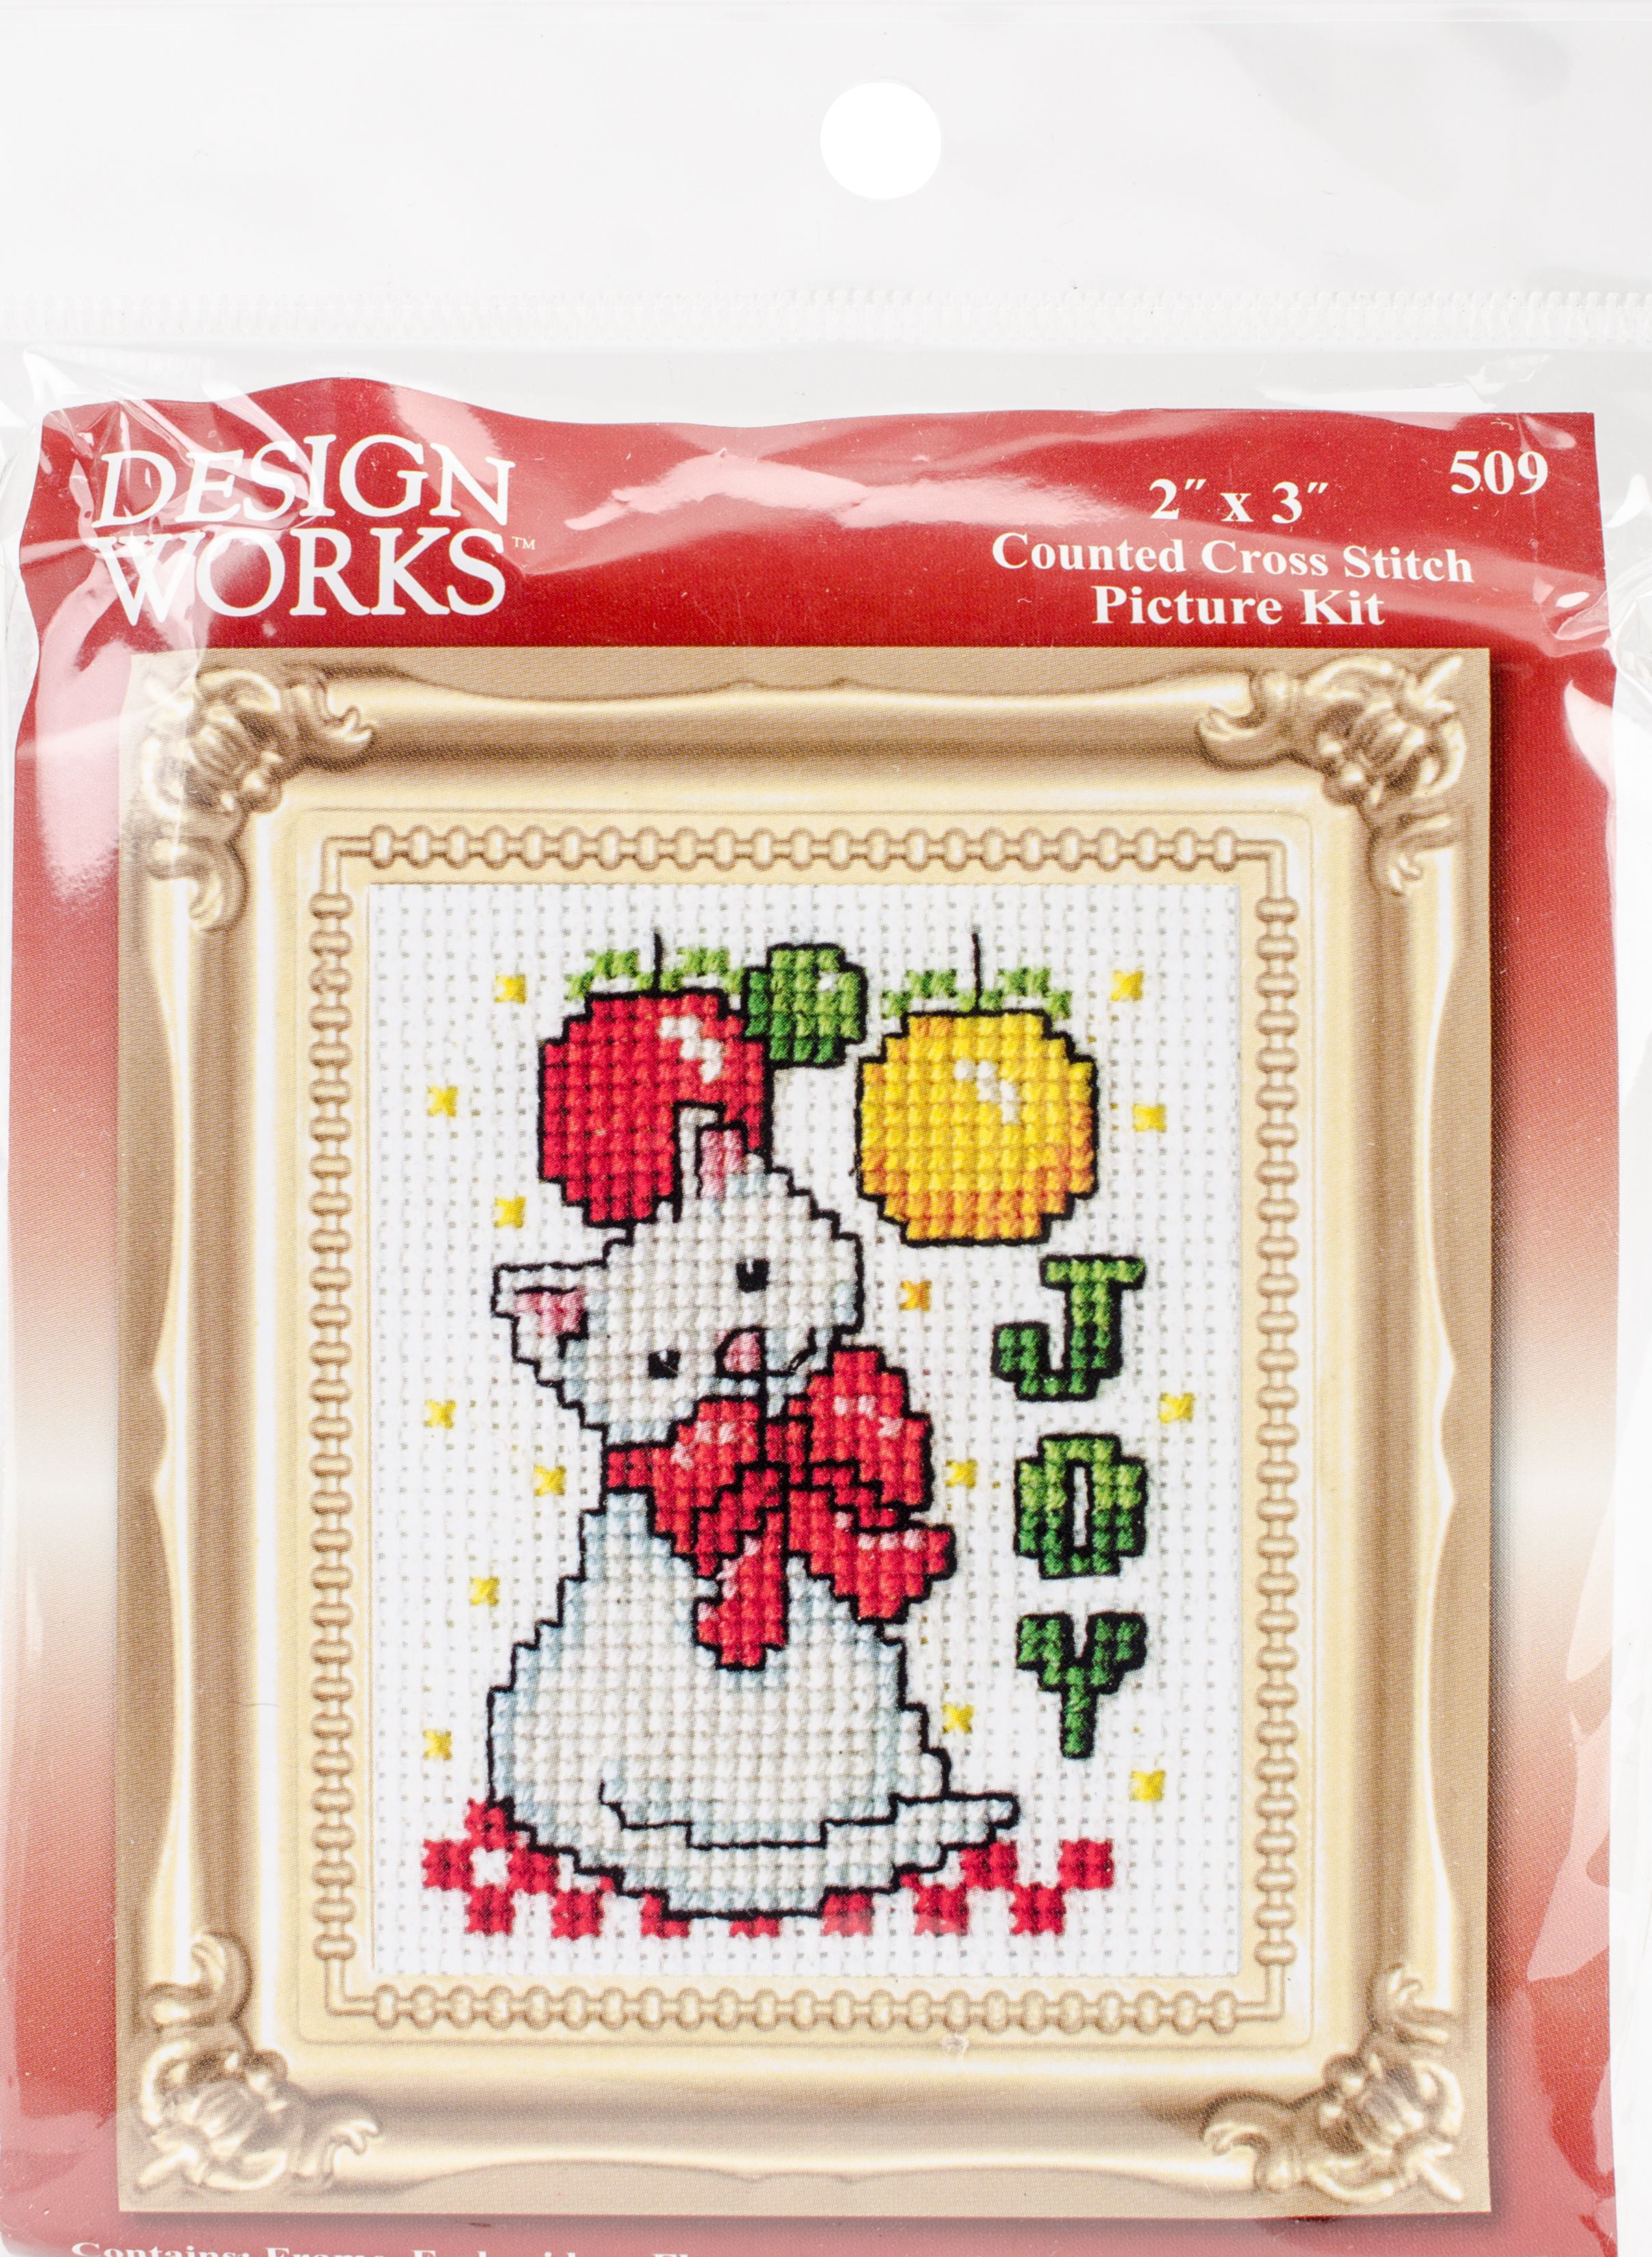 DIY Art Crafts & Sewing Needlepoints Kit for Home Decor 24x21 Joy Sunday Stamped Cross Stitch Kits Counted Cross Stitch Kit Cross-Stitching Patterns the Tree of Dreams 14CT Pre-printed Fabric